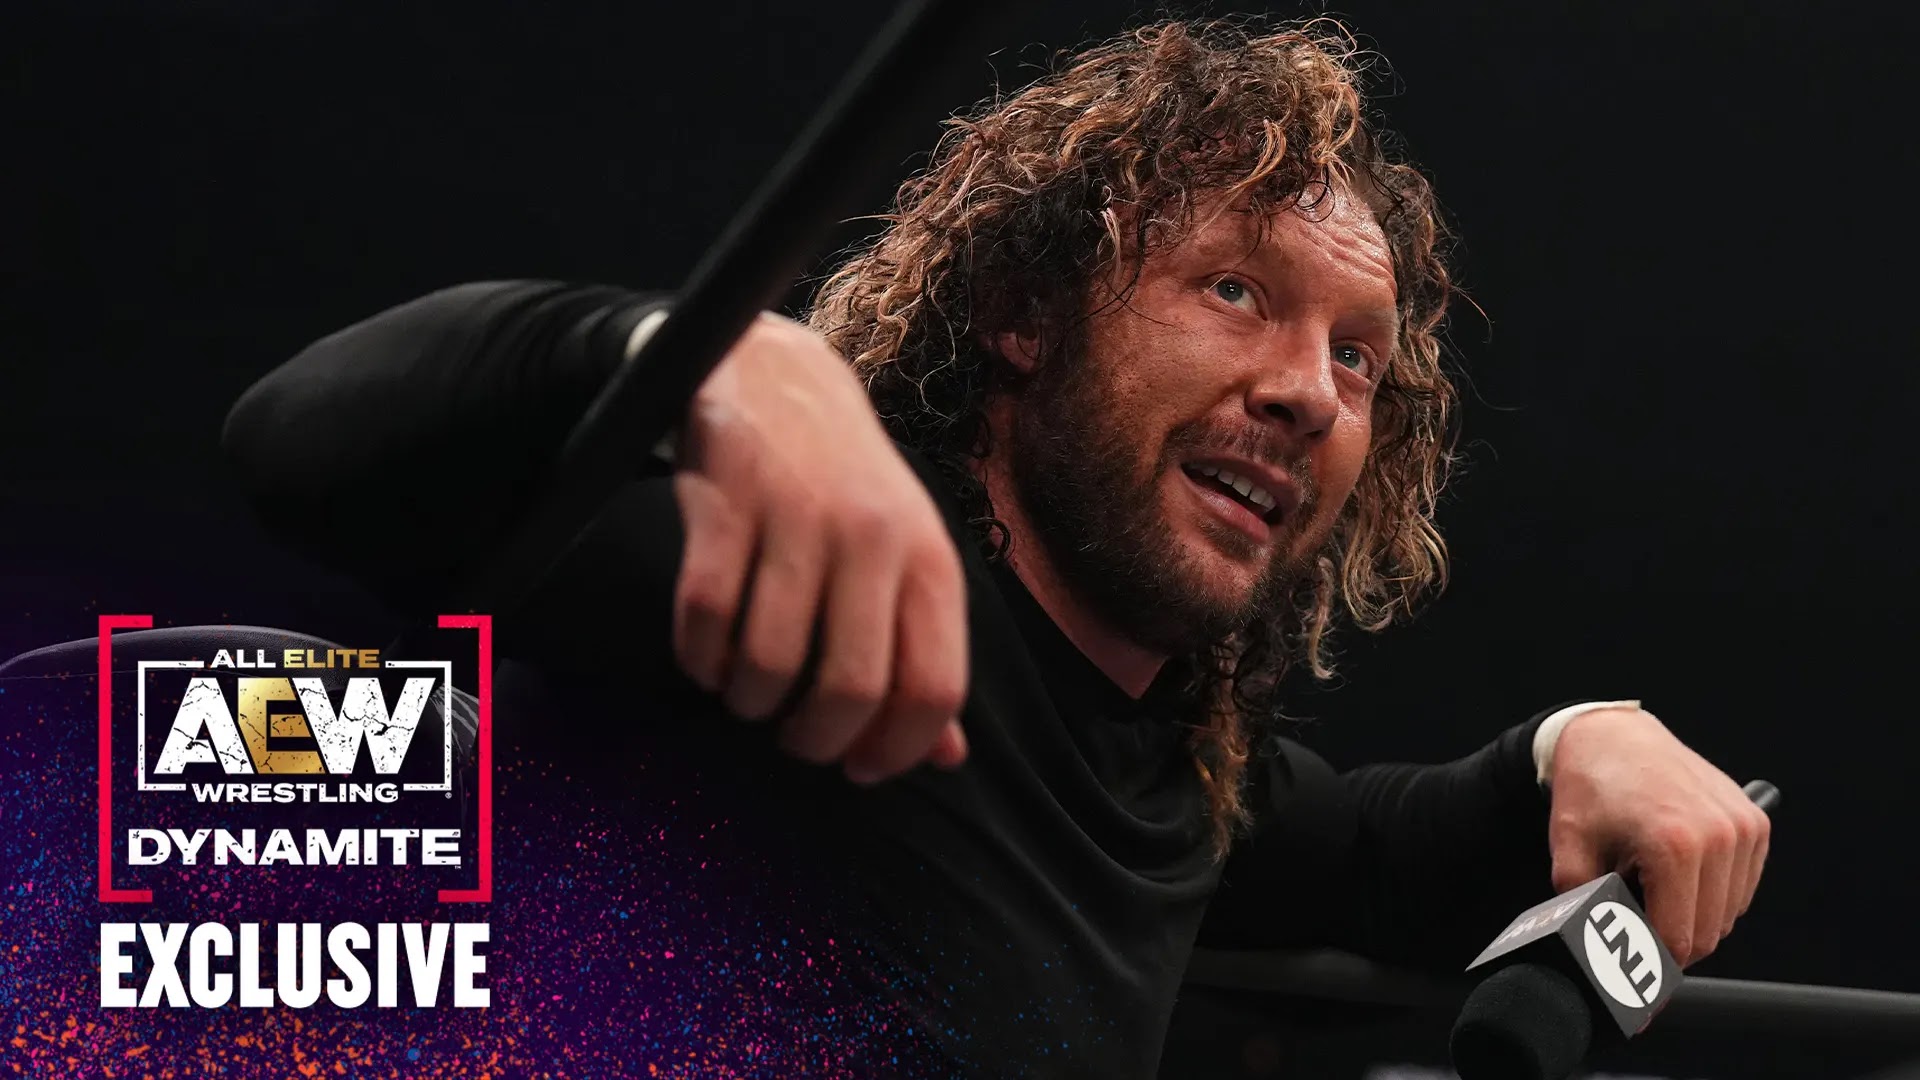 WATCH: Kenny Omega Breaks Character To Address Fans After AEW Dynamite Went Off Air